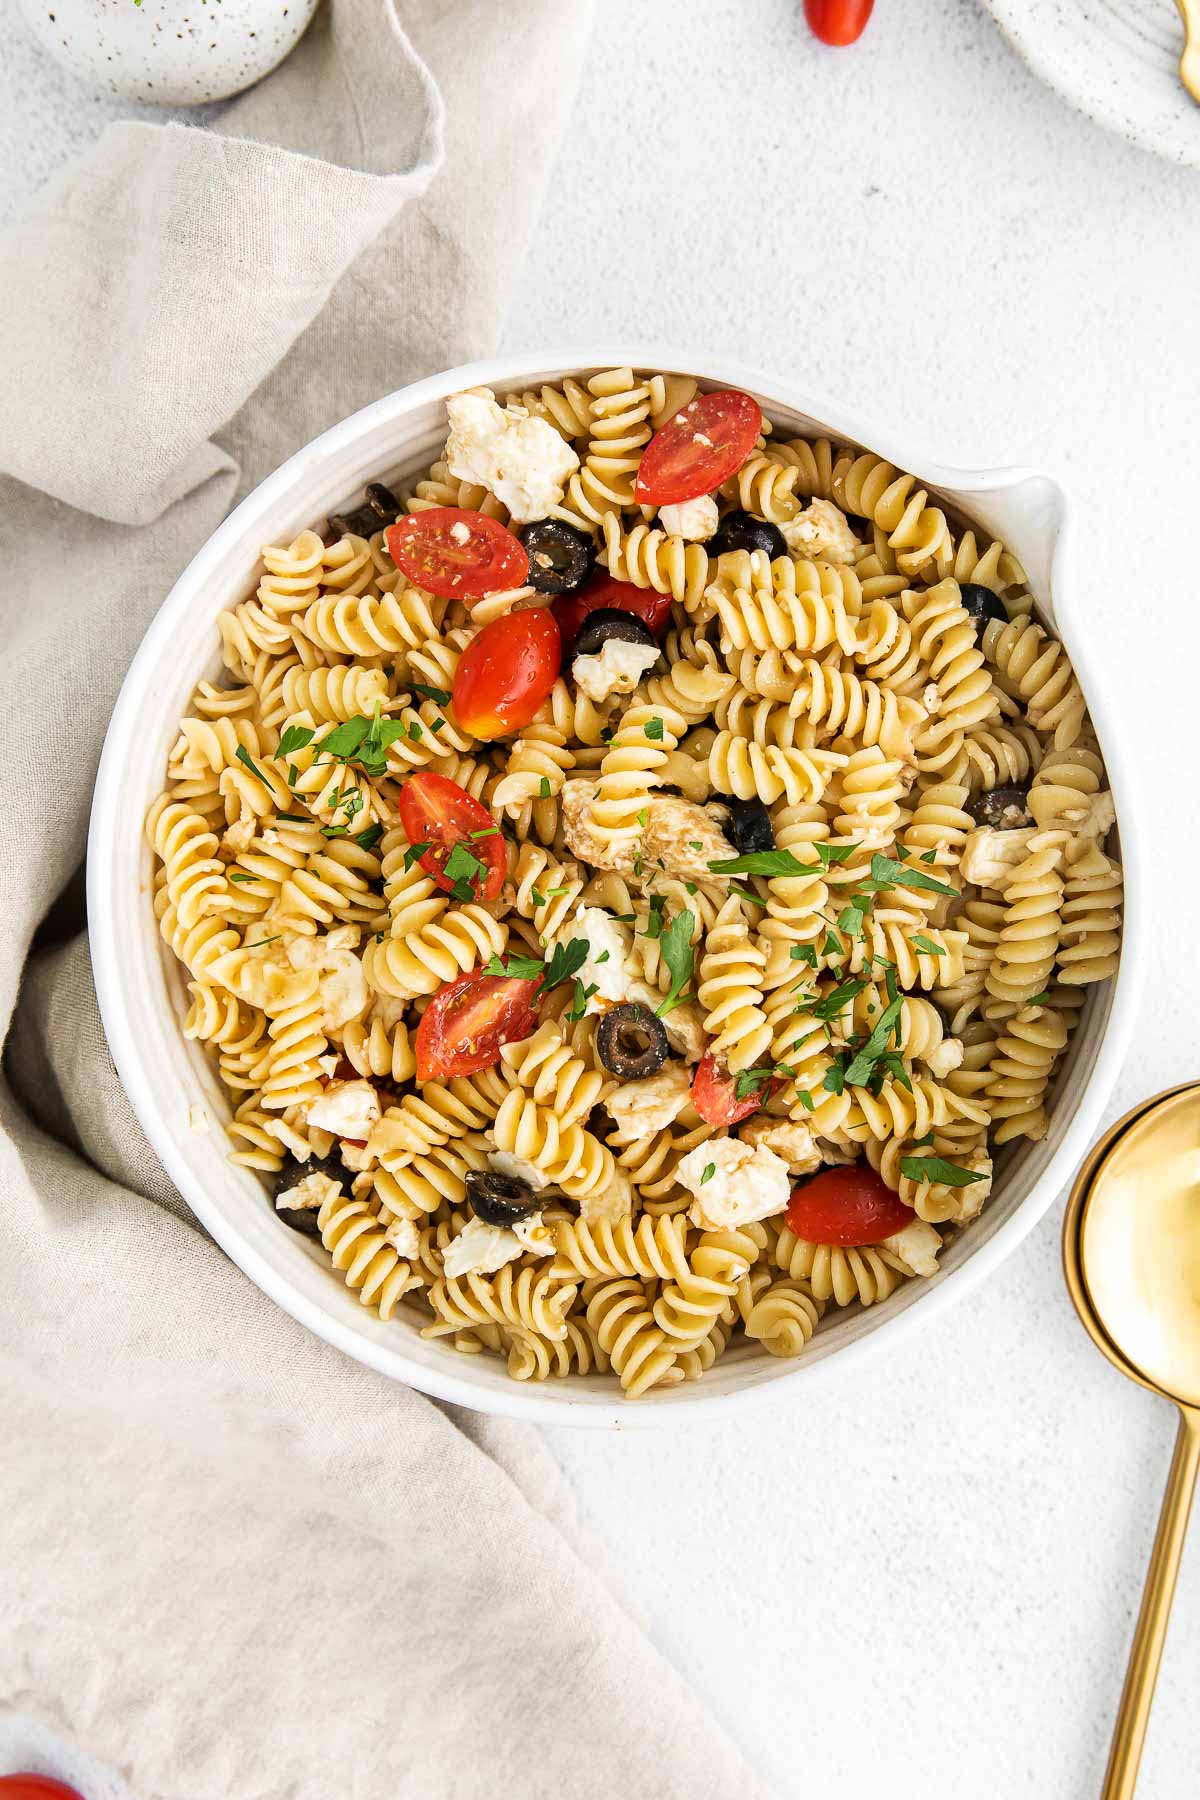 white bowl with greek pasta salad mixed with cherry tomatoes, olives and feta cheese with a tan napkin and gold serving spoon